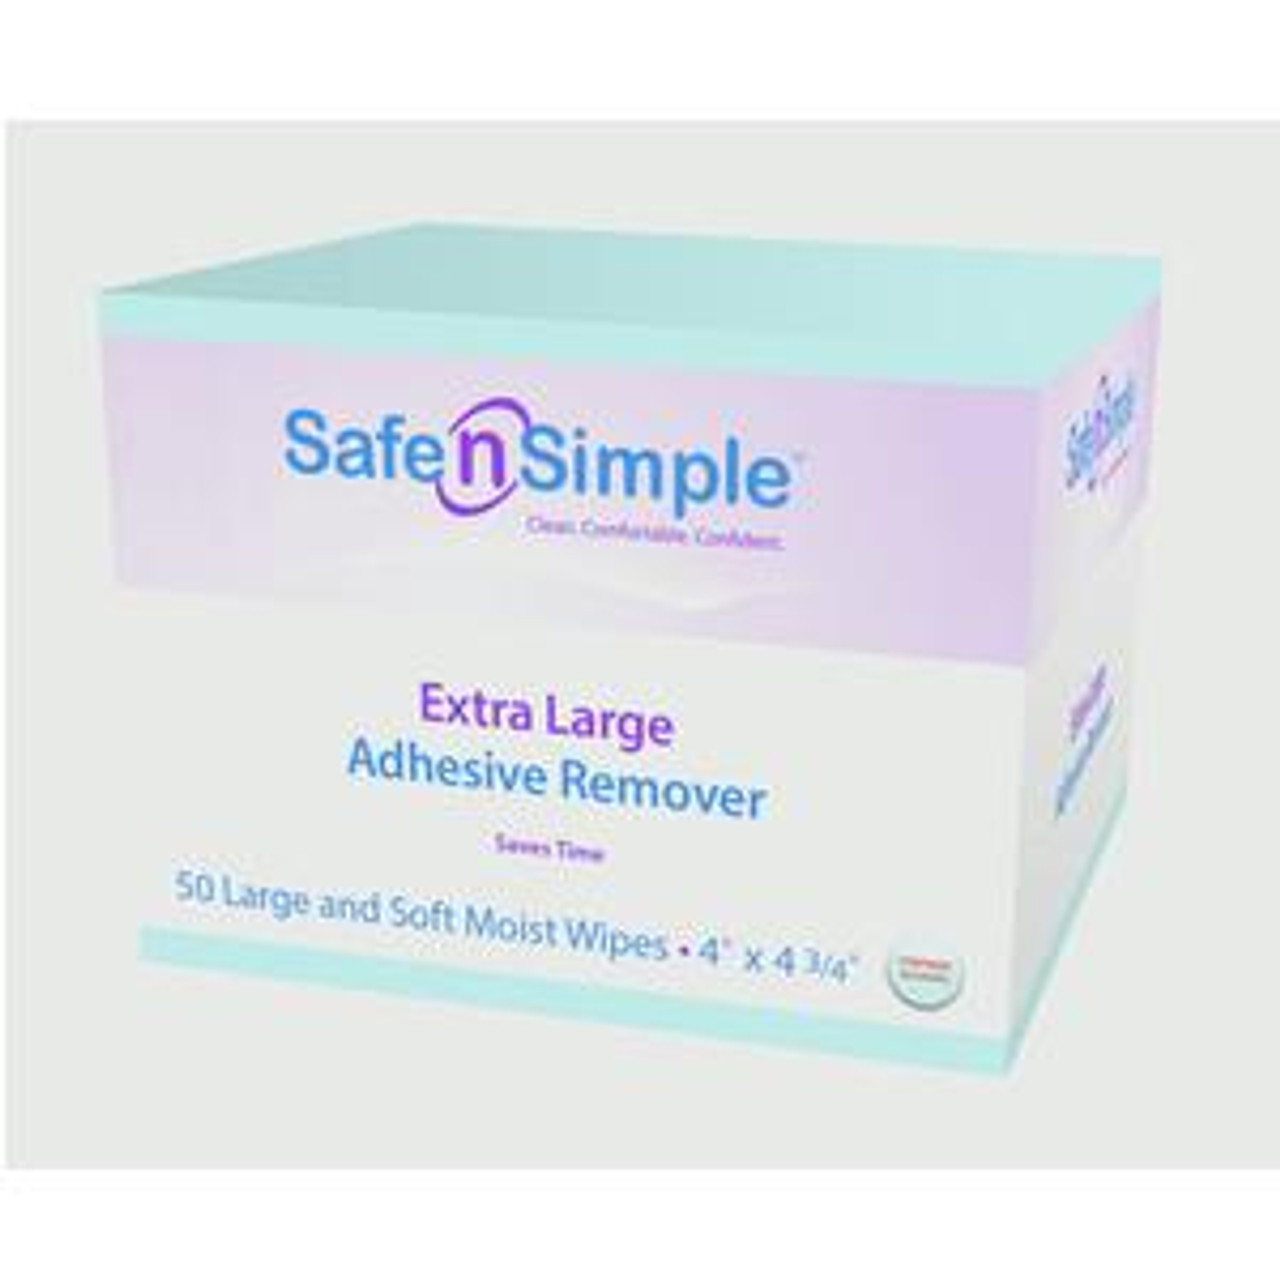 Adhesive Remover Wipes (50/box)